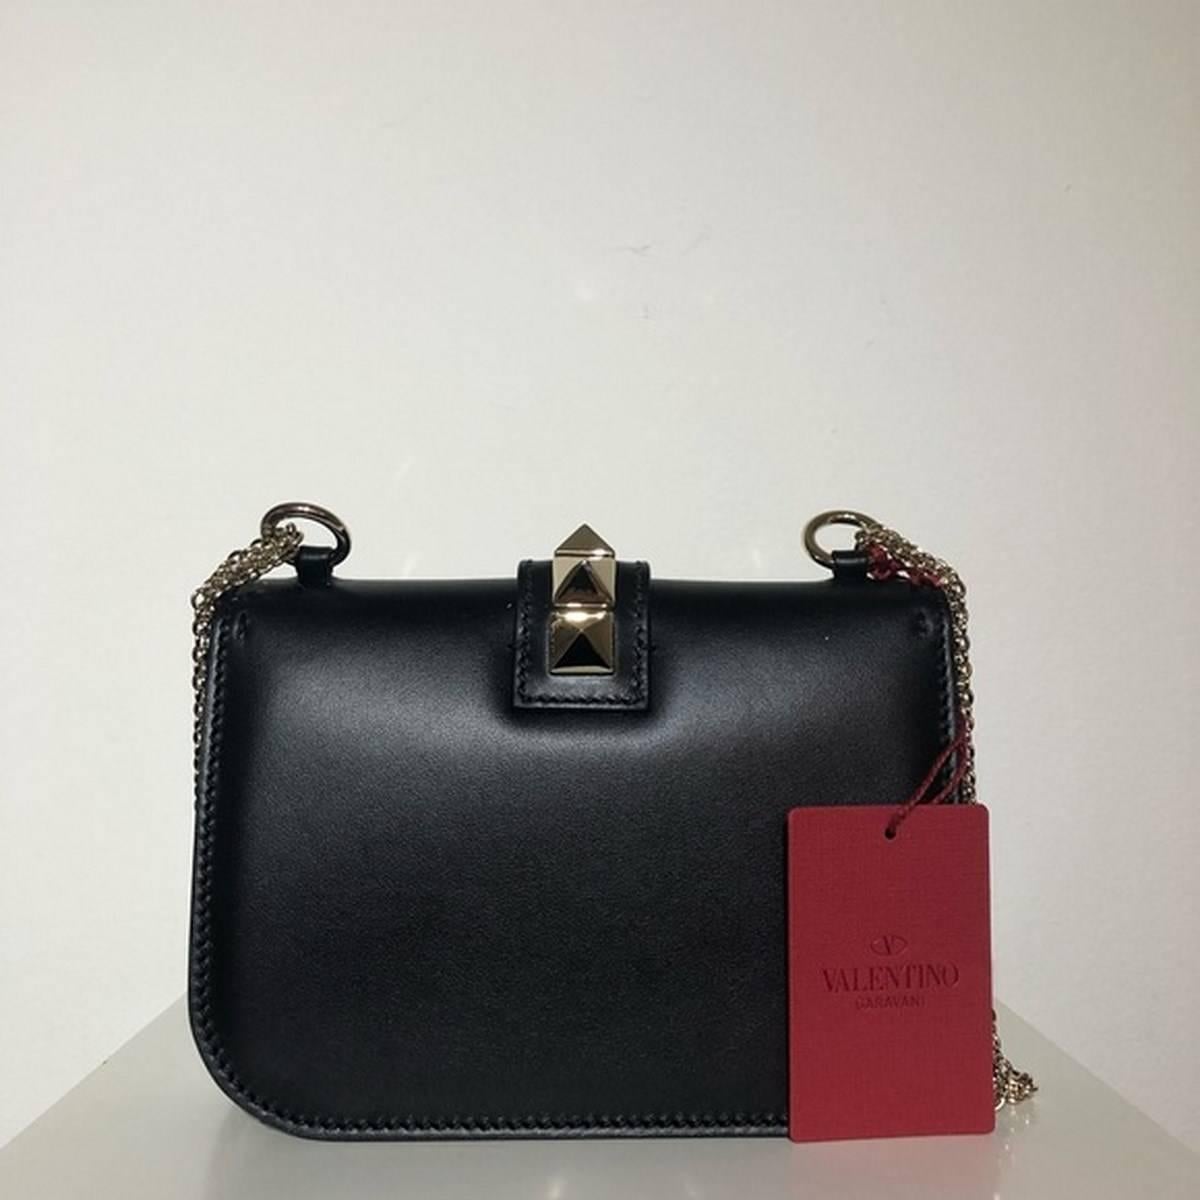 Valentino Glam Lock Leather Crossbody Bag
Material : Leather
Colour : Black
MADE IN ITALY.
Width 8 in, Height 5 in, Depth 2 in.